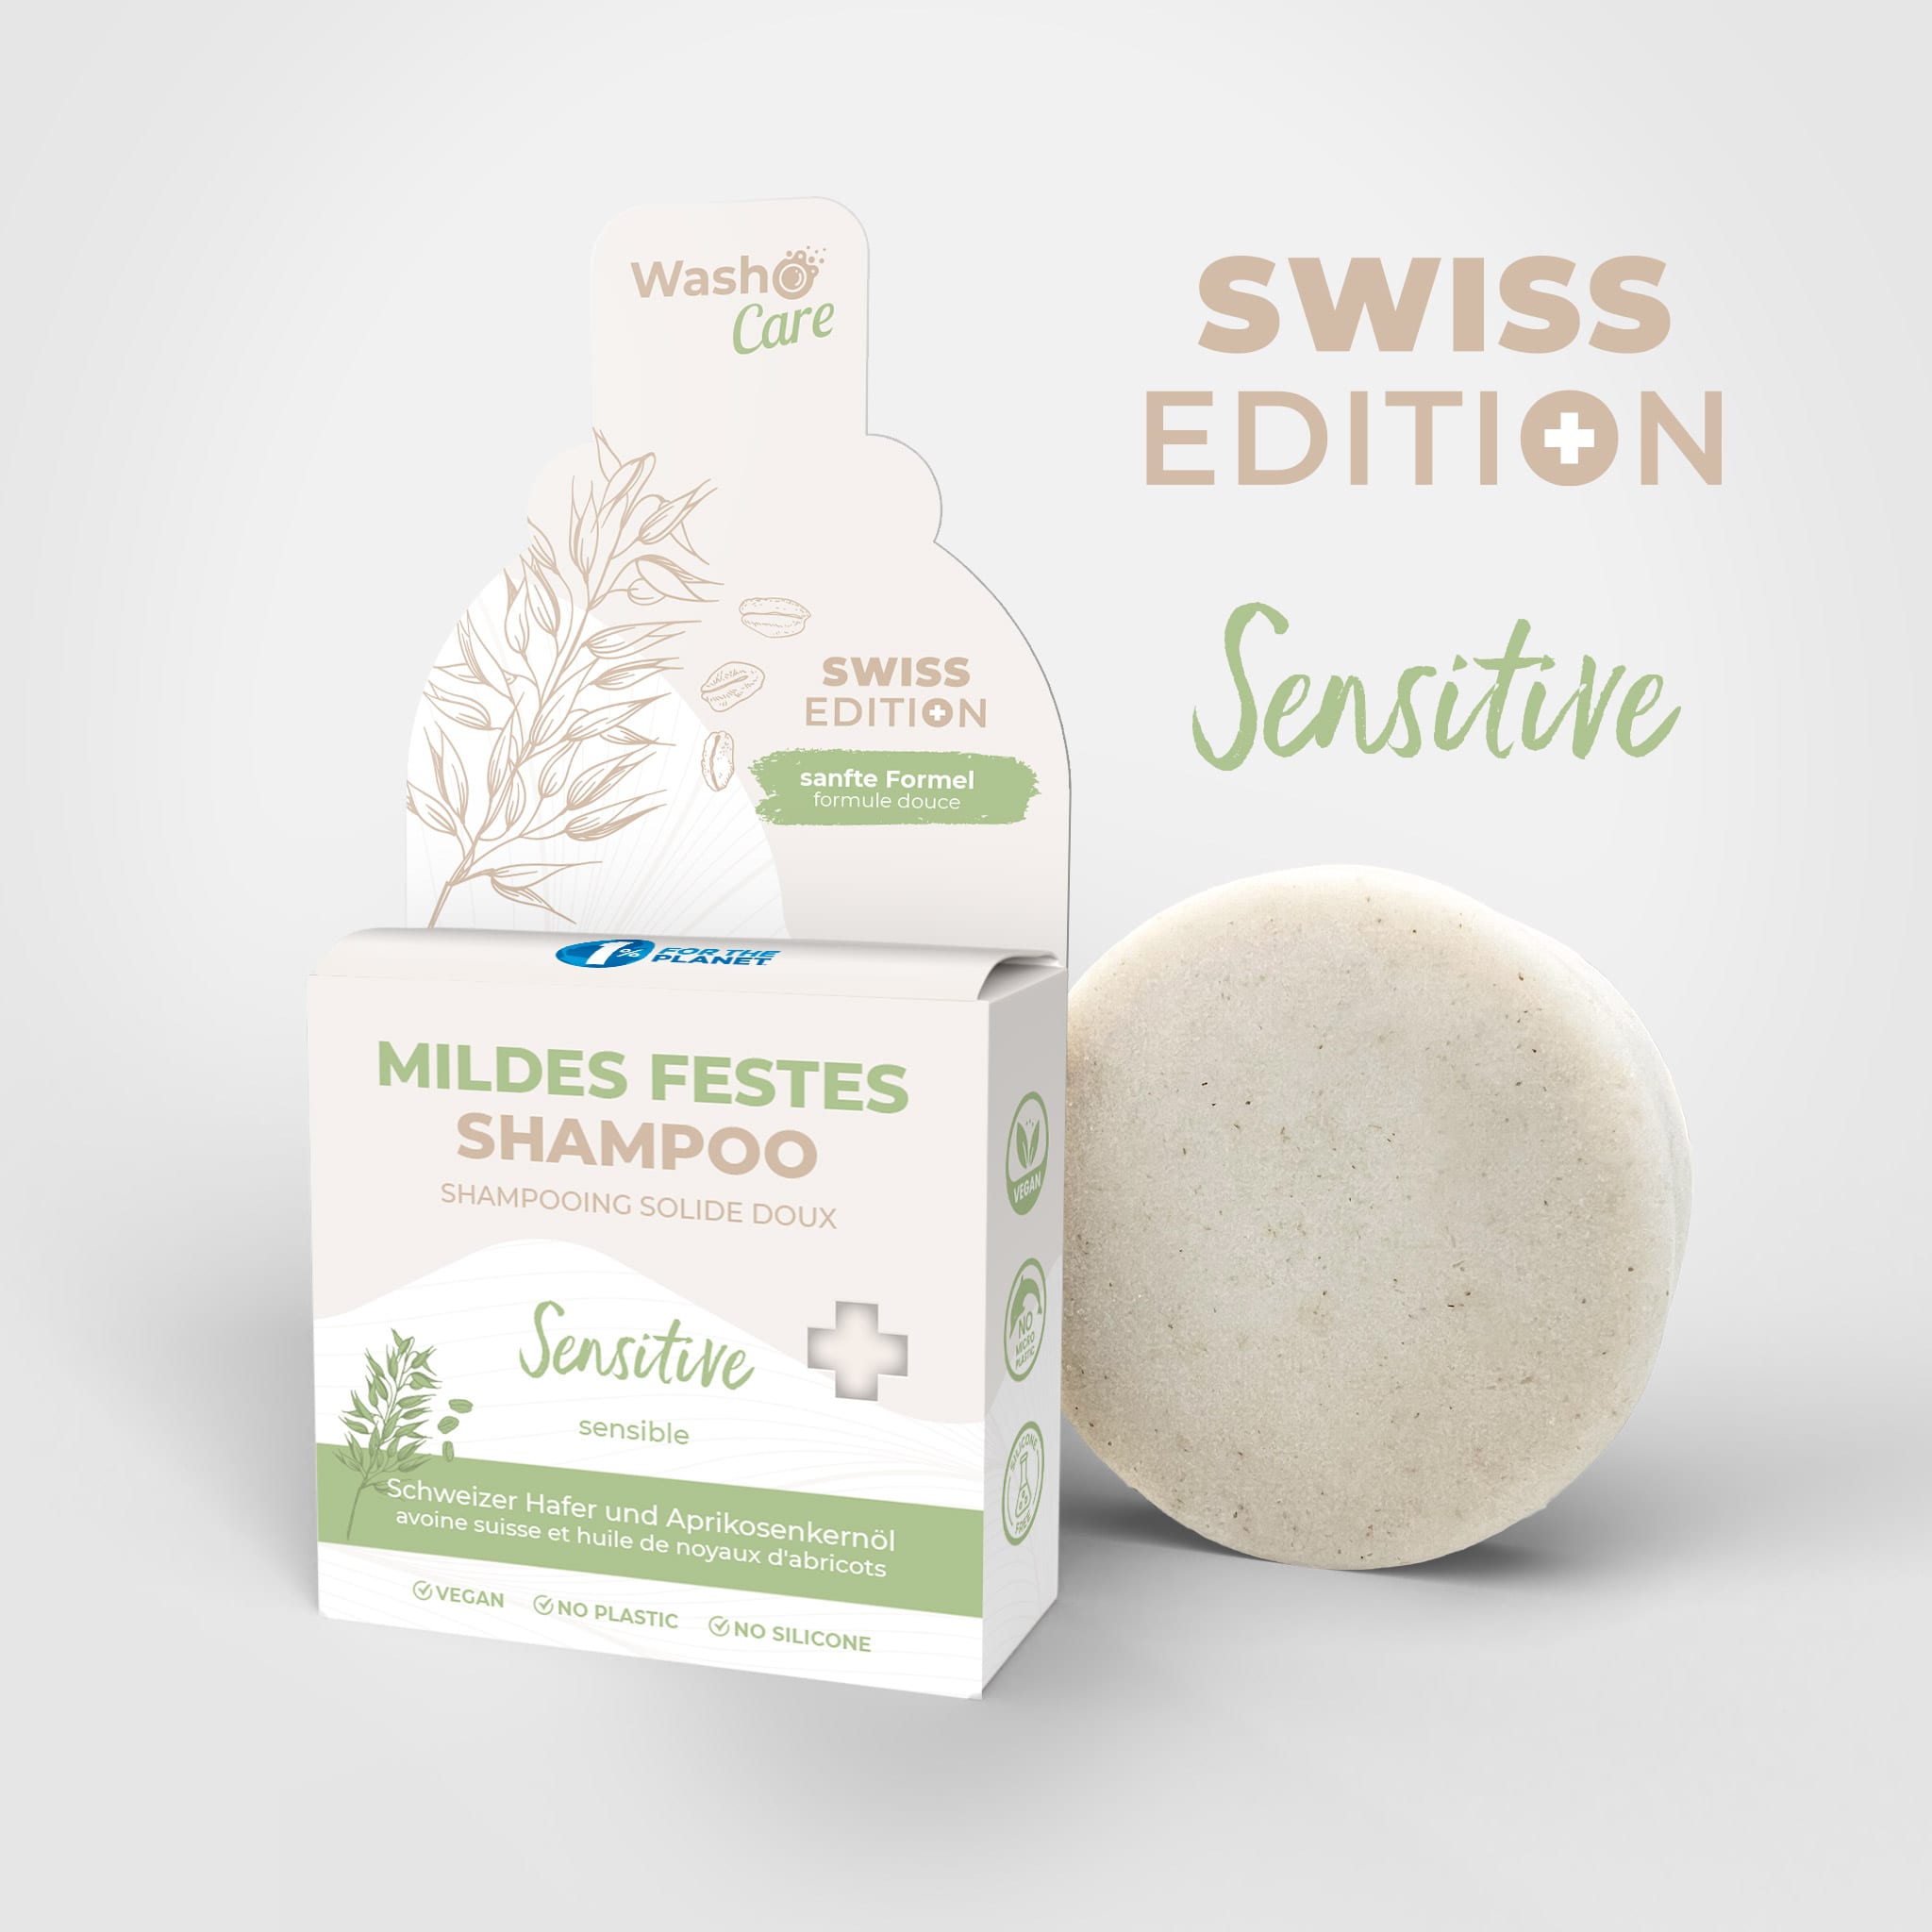 Washo Care Swiss Edition Shampooing solide doux Sensitive